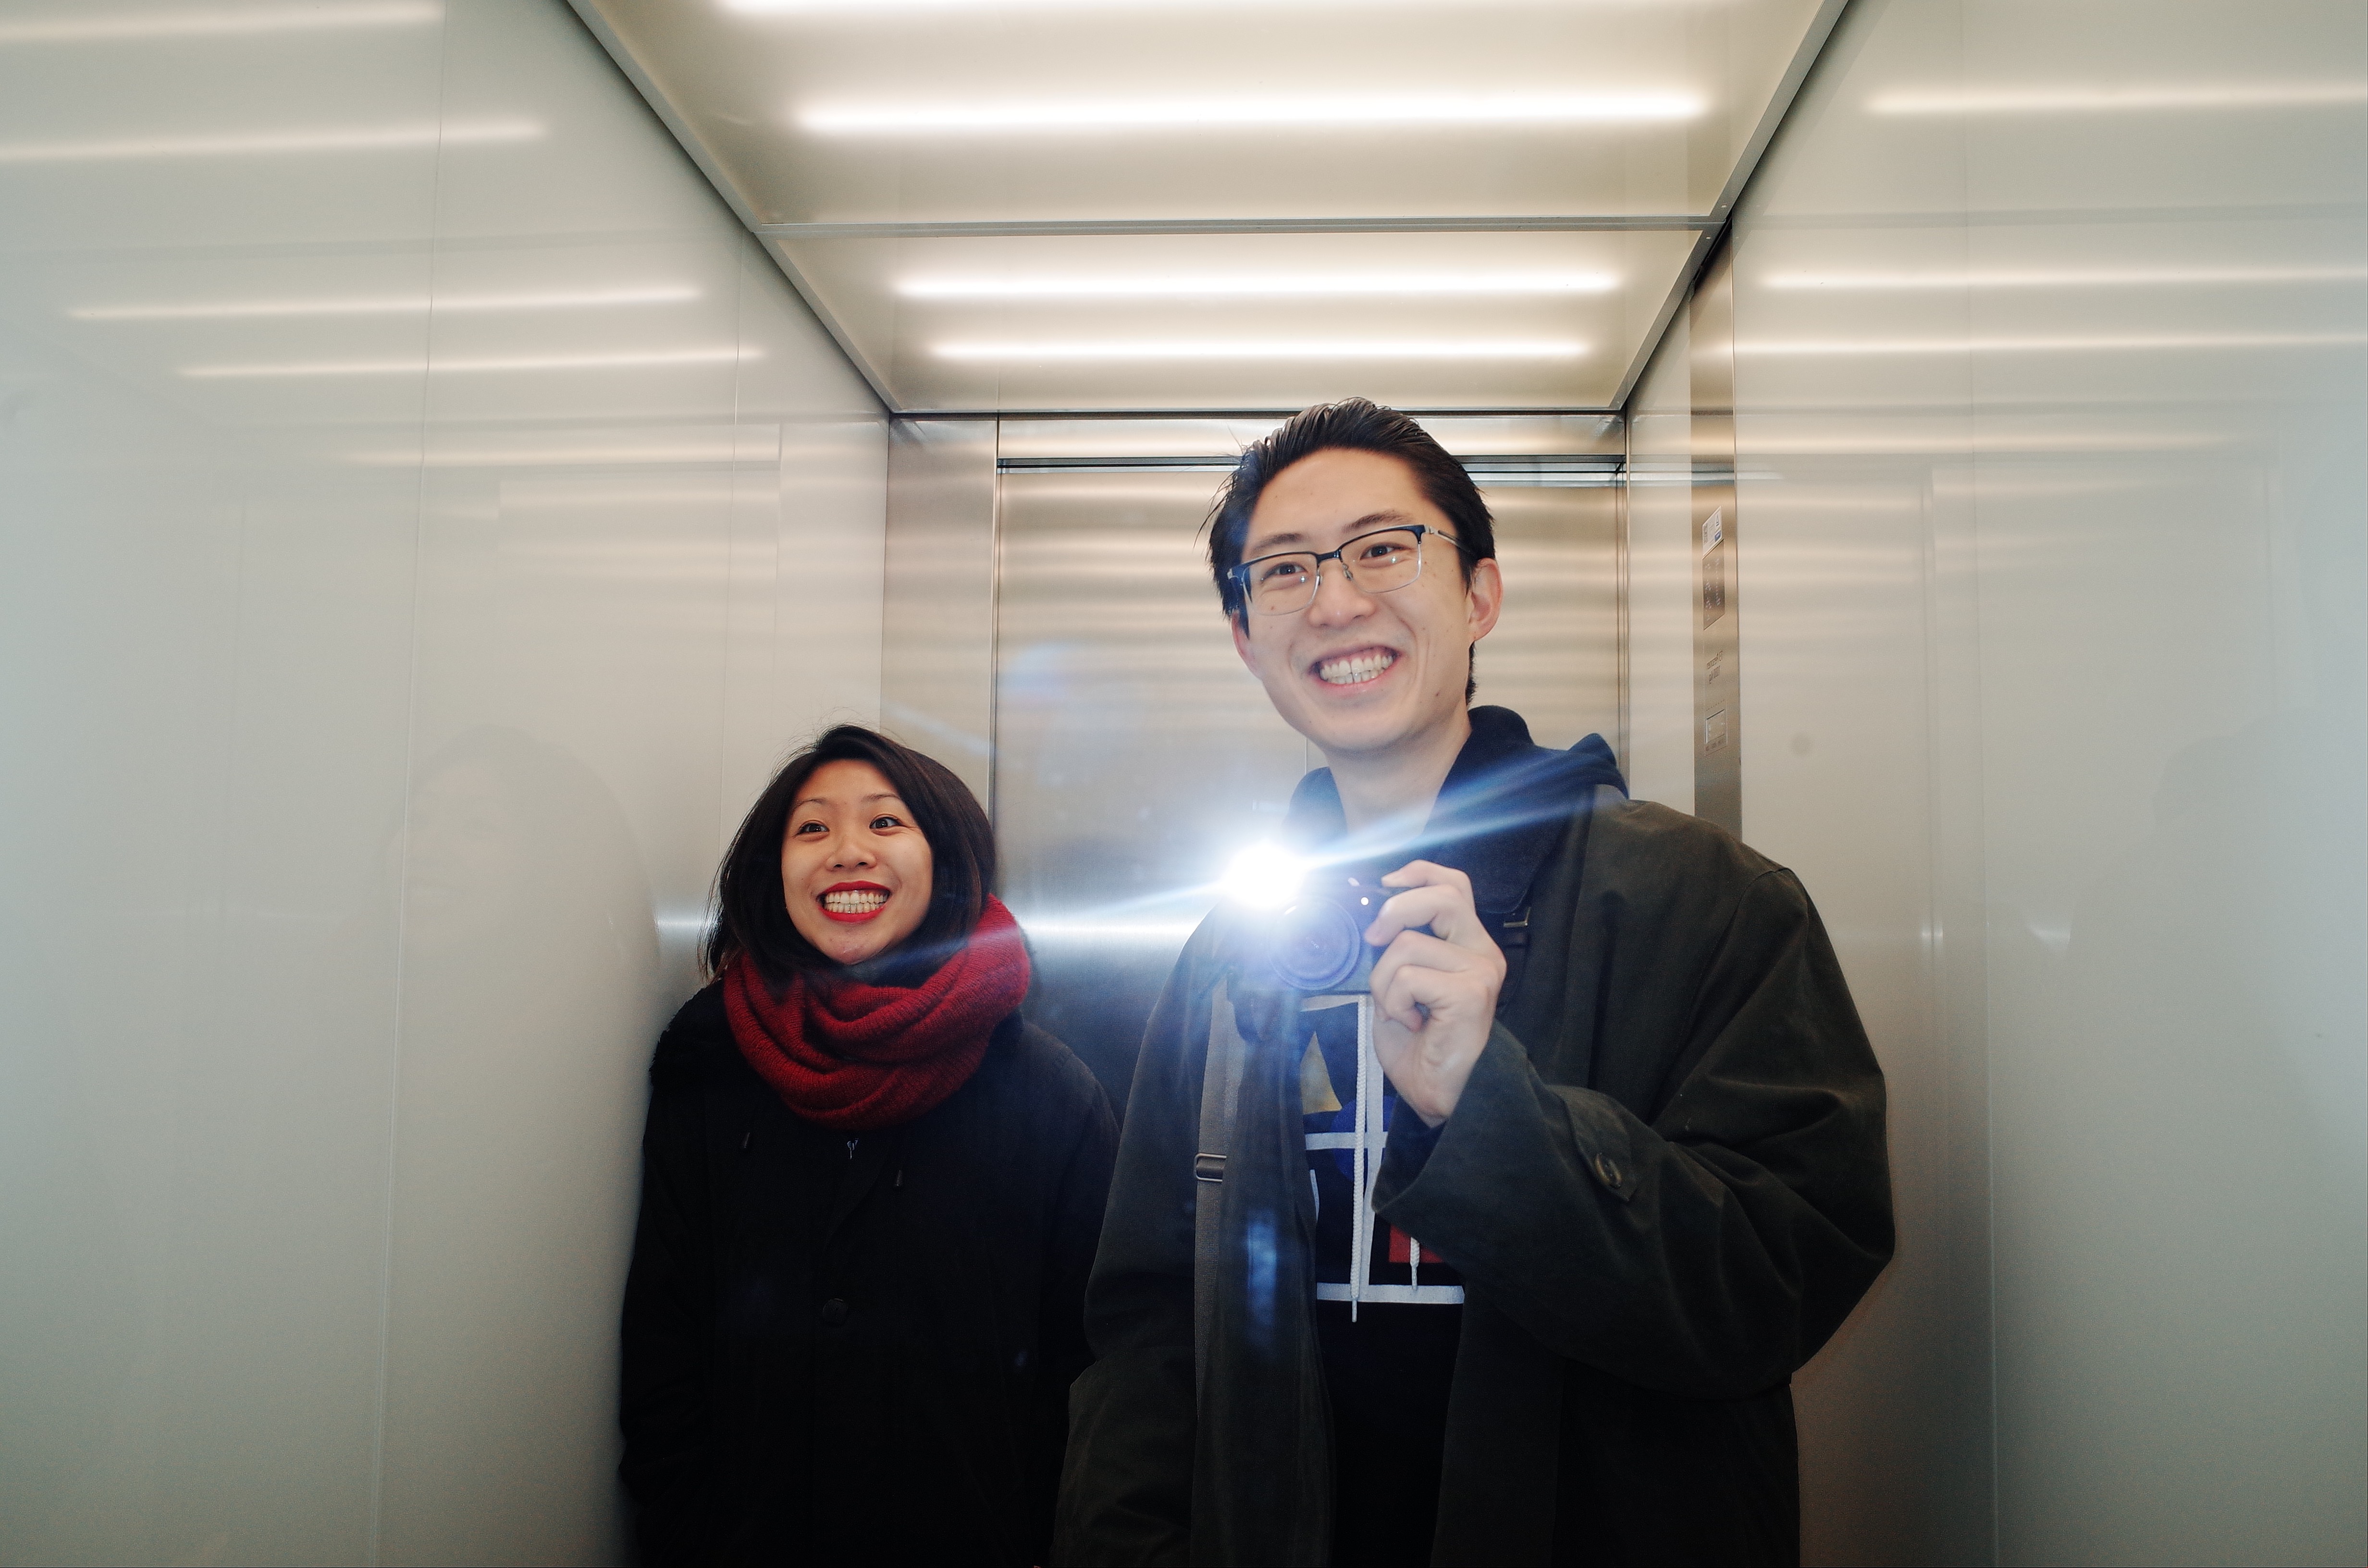 Me and Cindy in elevator. Berlin, 2017